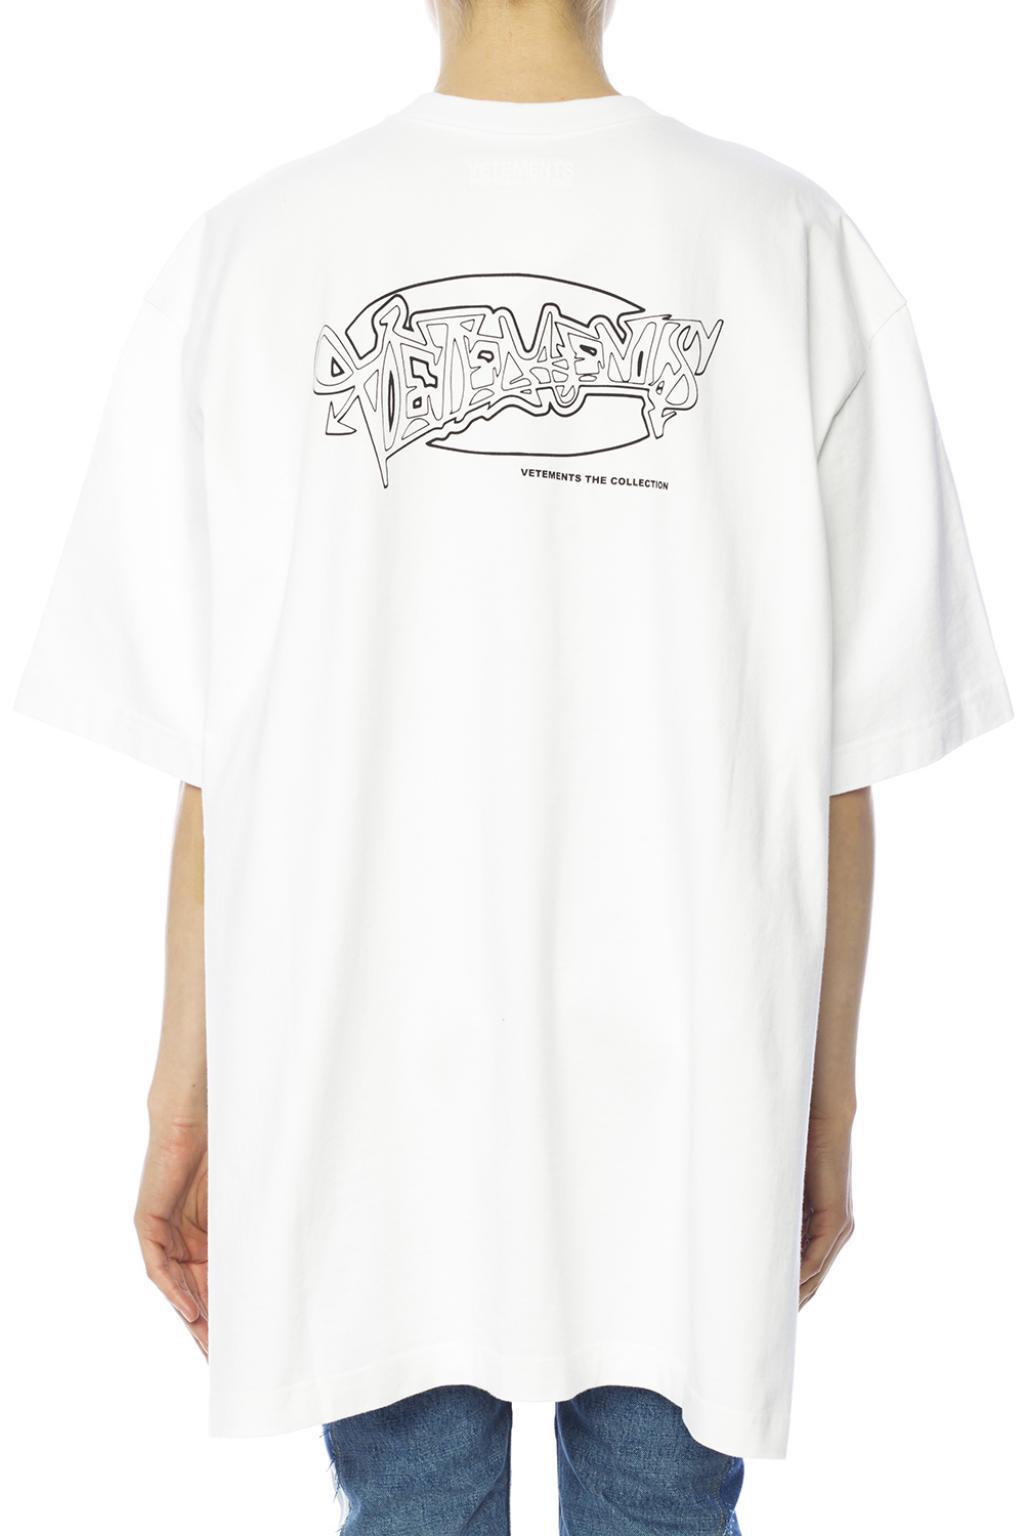 Vetements Printed Cotton-jersey T-shirt White - Lyst